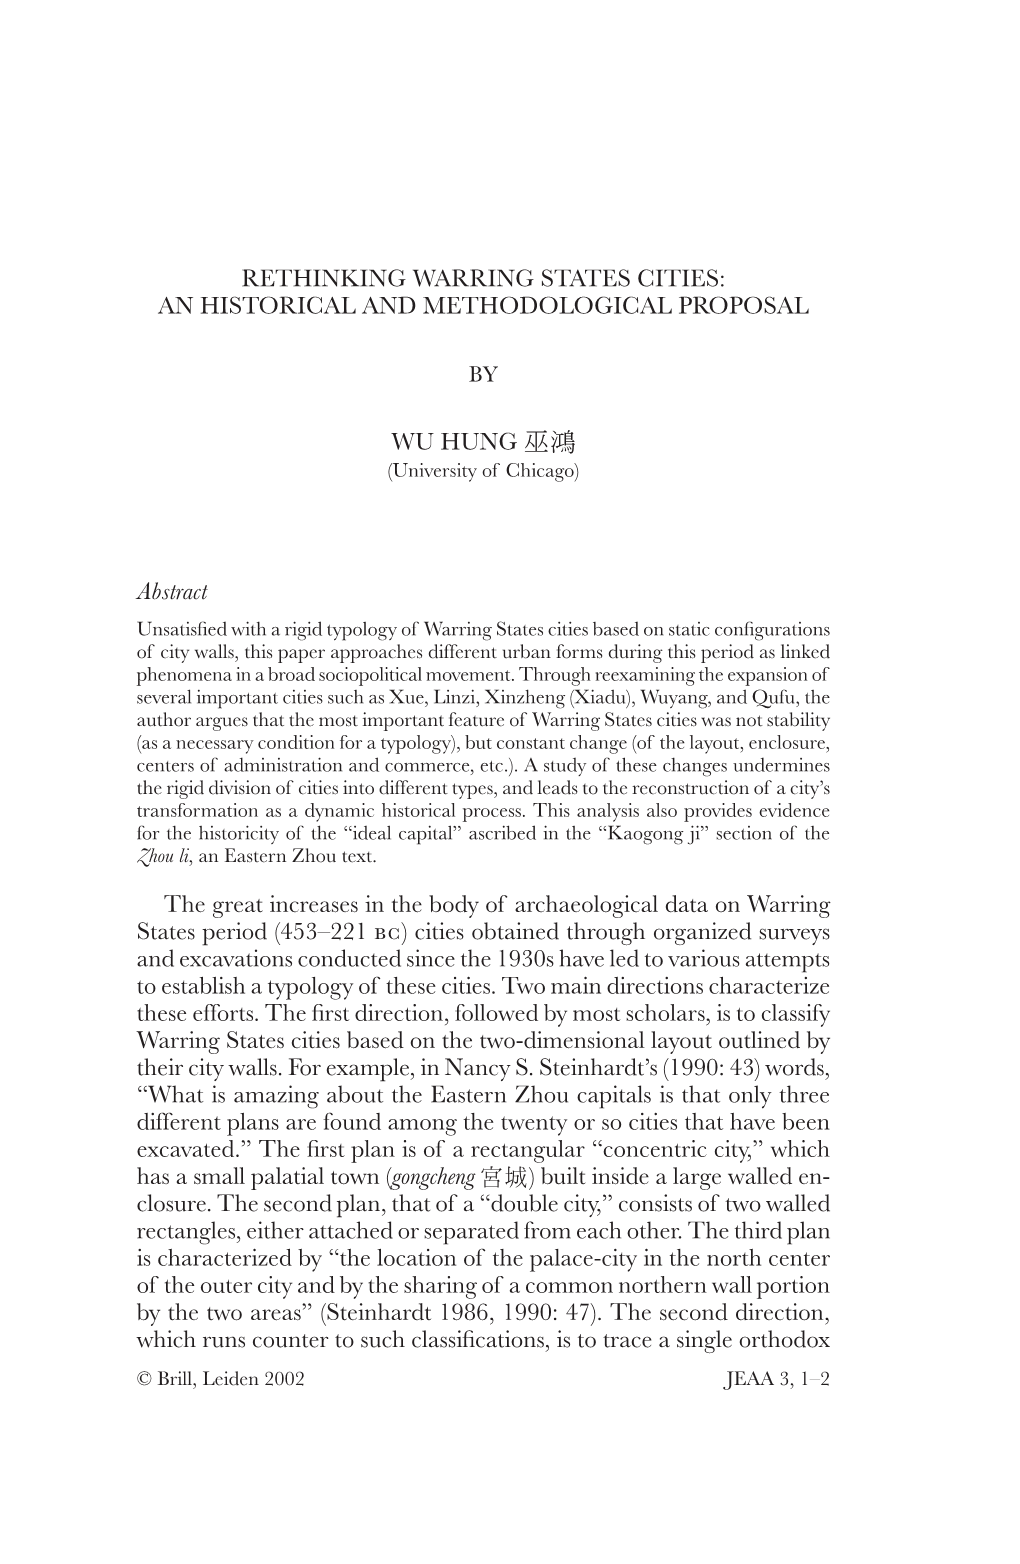 Rethinking Warring States Cities: an Historical and Methodological Proposal